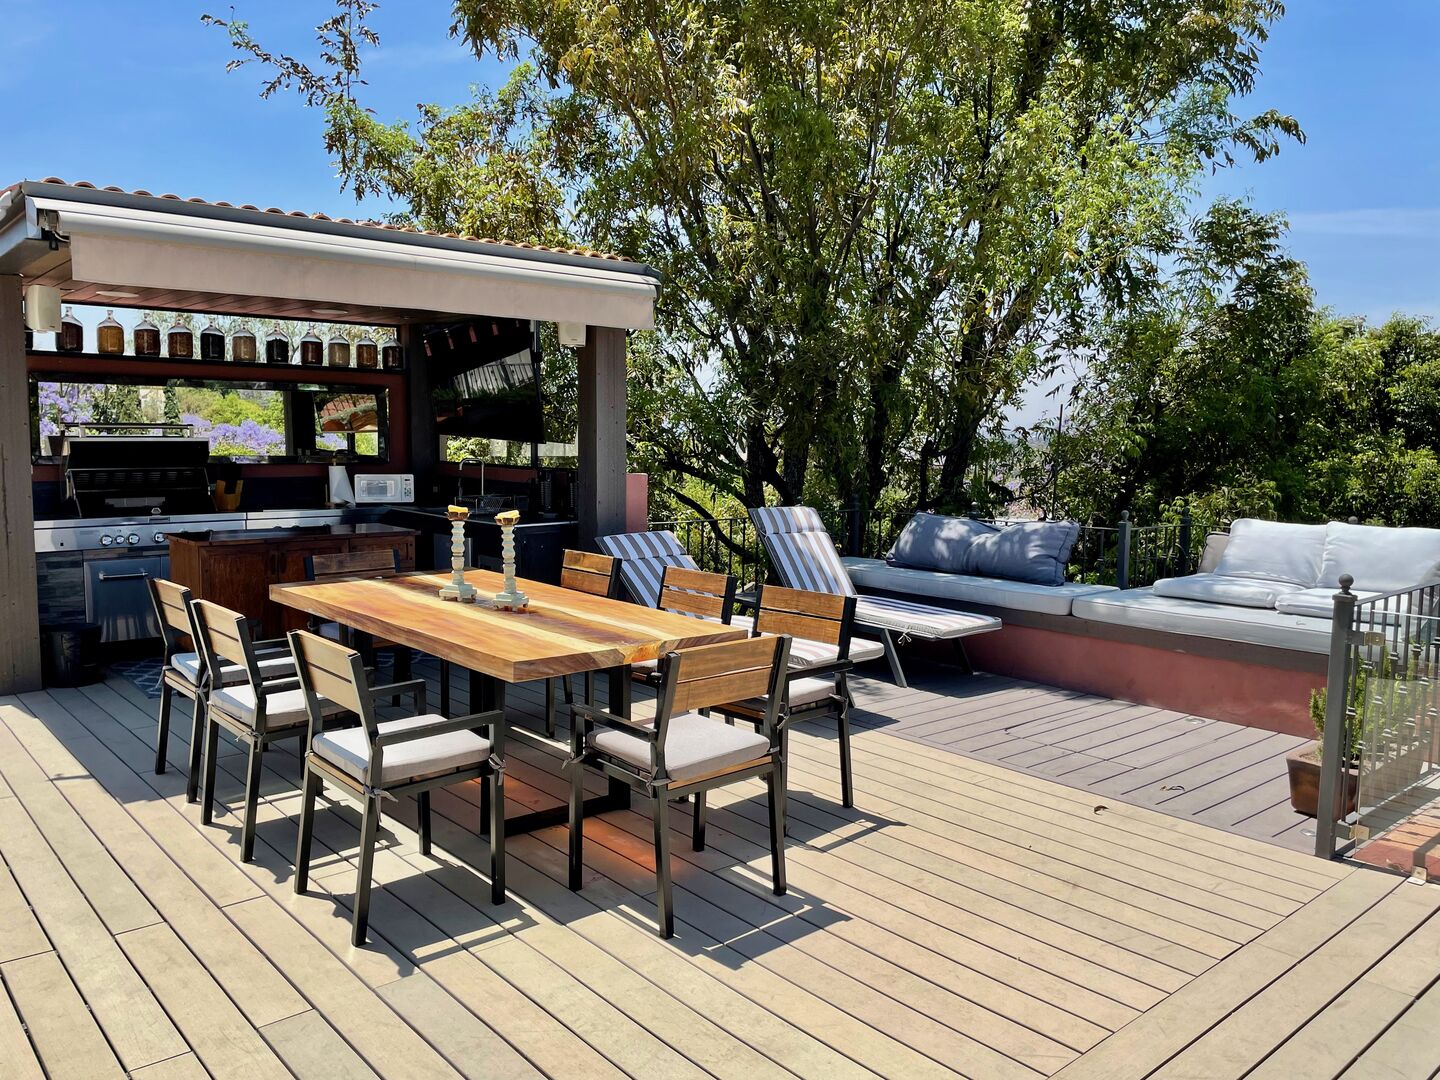 Roof Terrace dining, kitchen and seating area